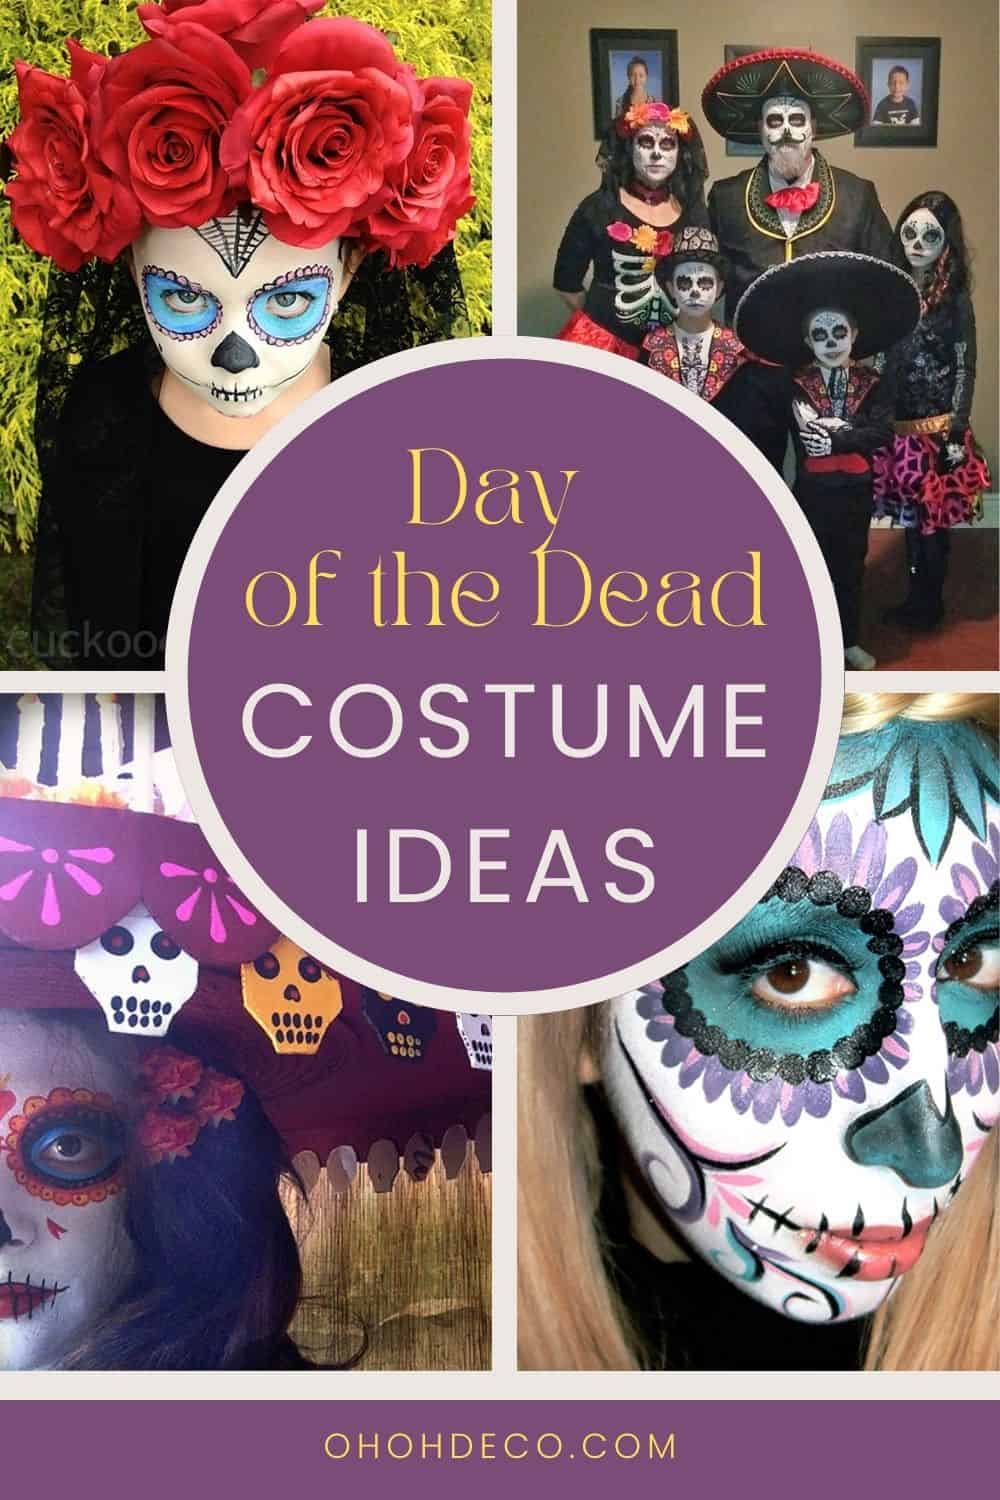 Day of the dead costume ideas